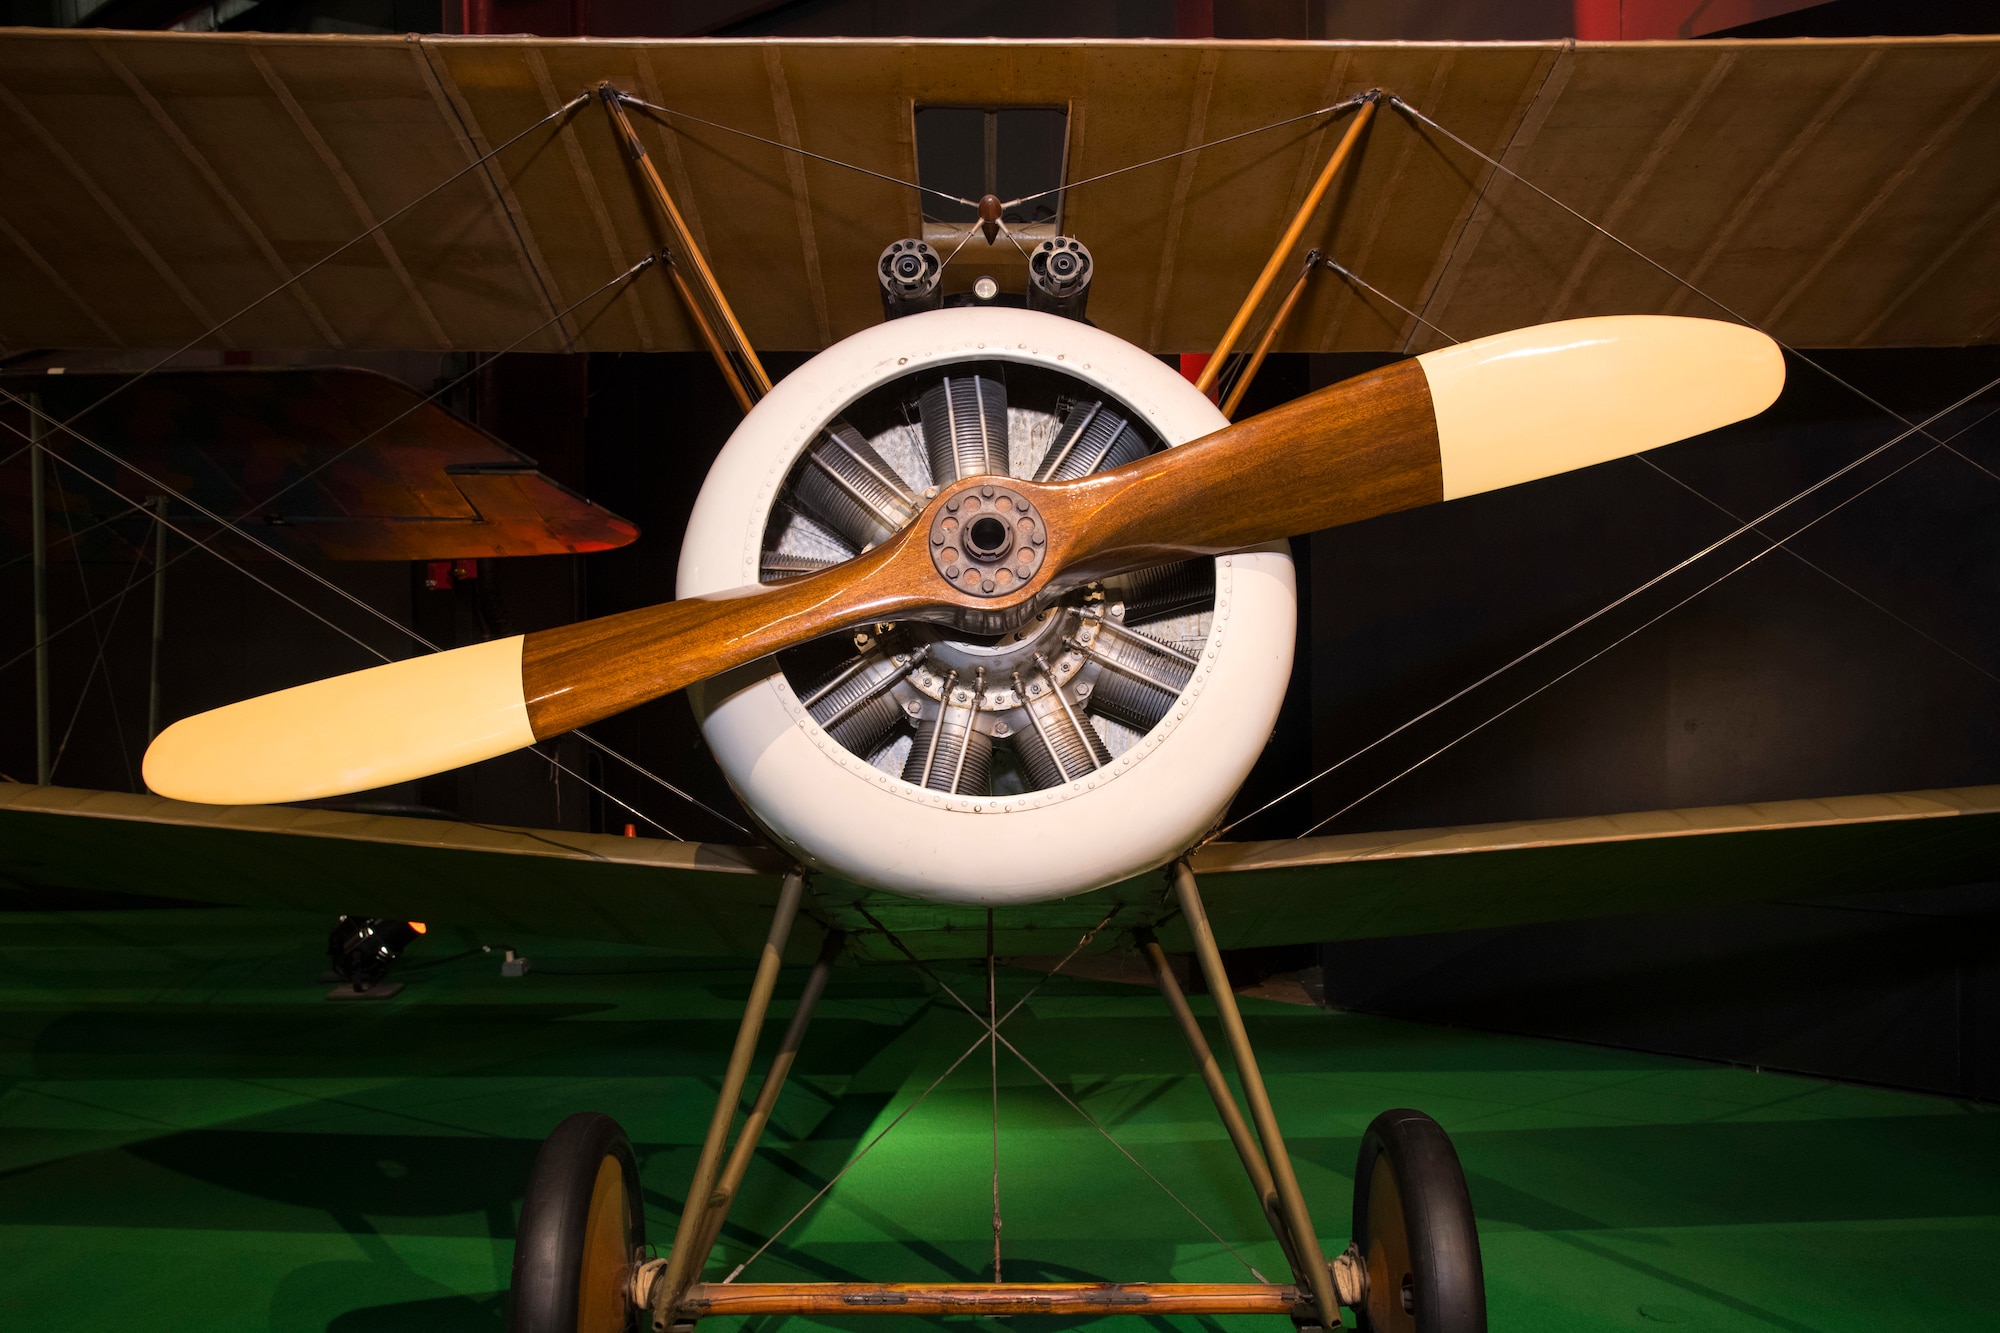 DAYTON, Ohio -- Sopwith Camel F.1 in the Early Years Gallery at the National Museum of the United States Air Force. (U.S. Air Force photo by Ken LaRock)